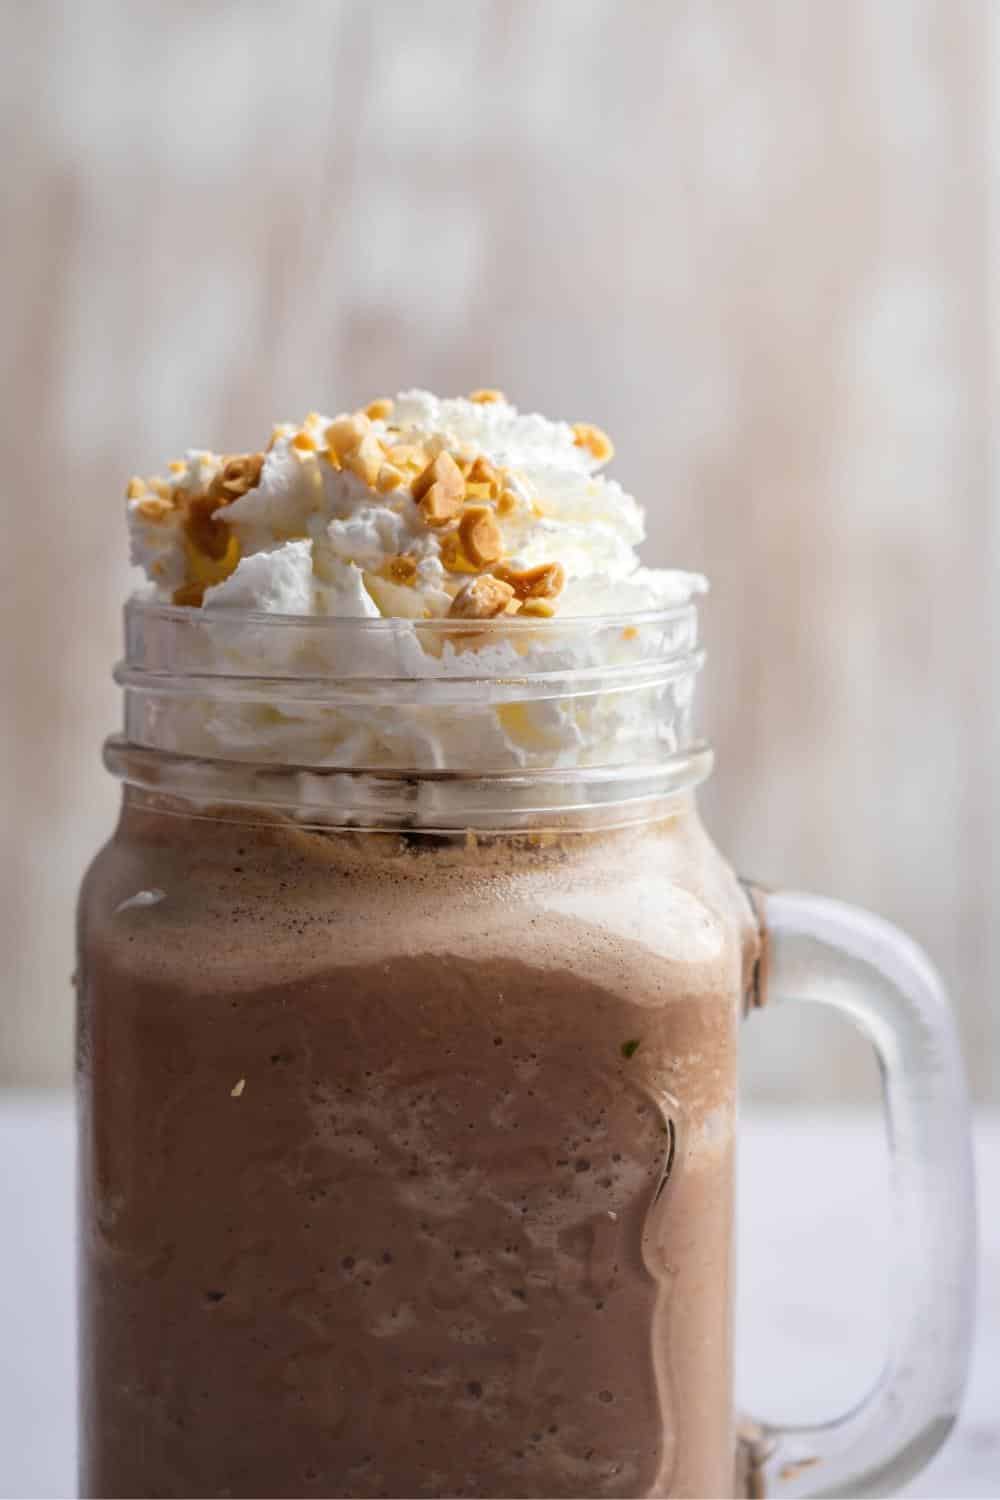 A glass mug that is filled with a keto smoothie with whipped cream on top.